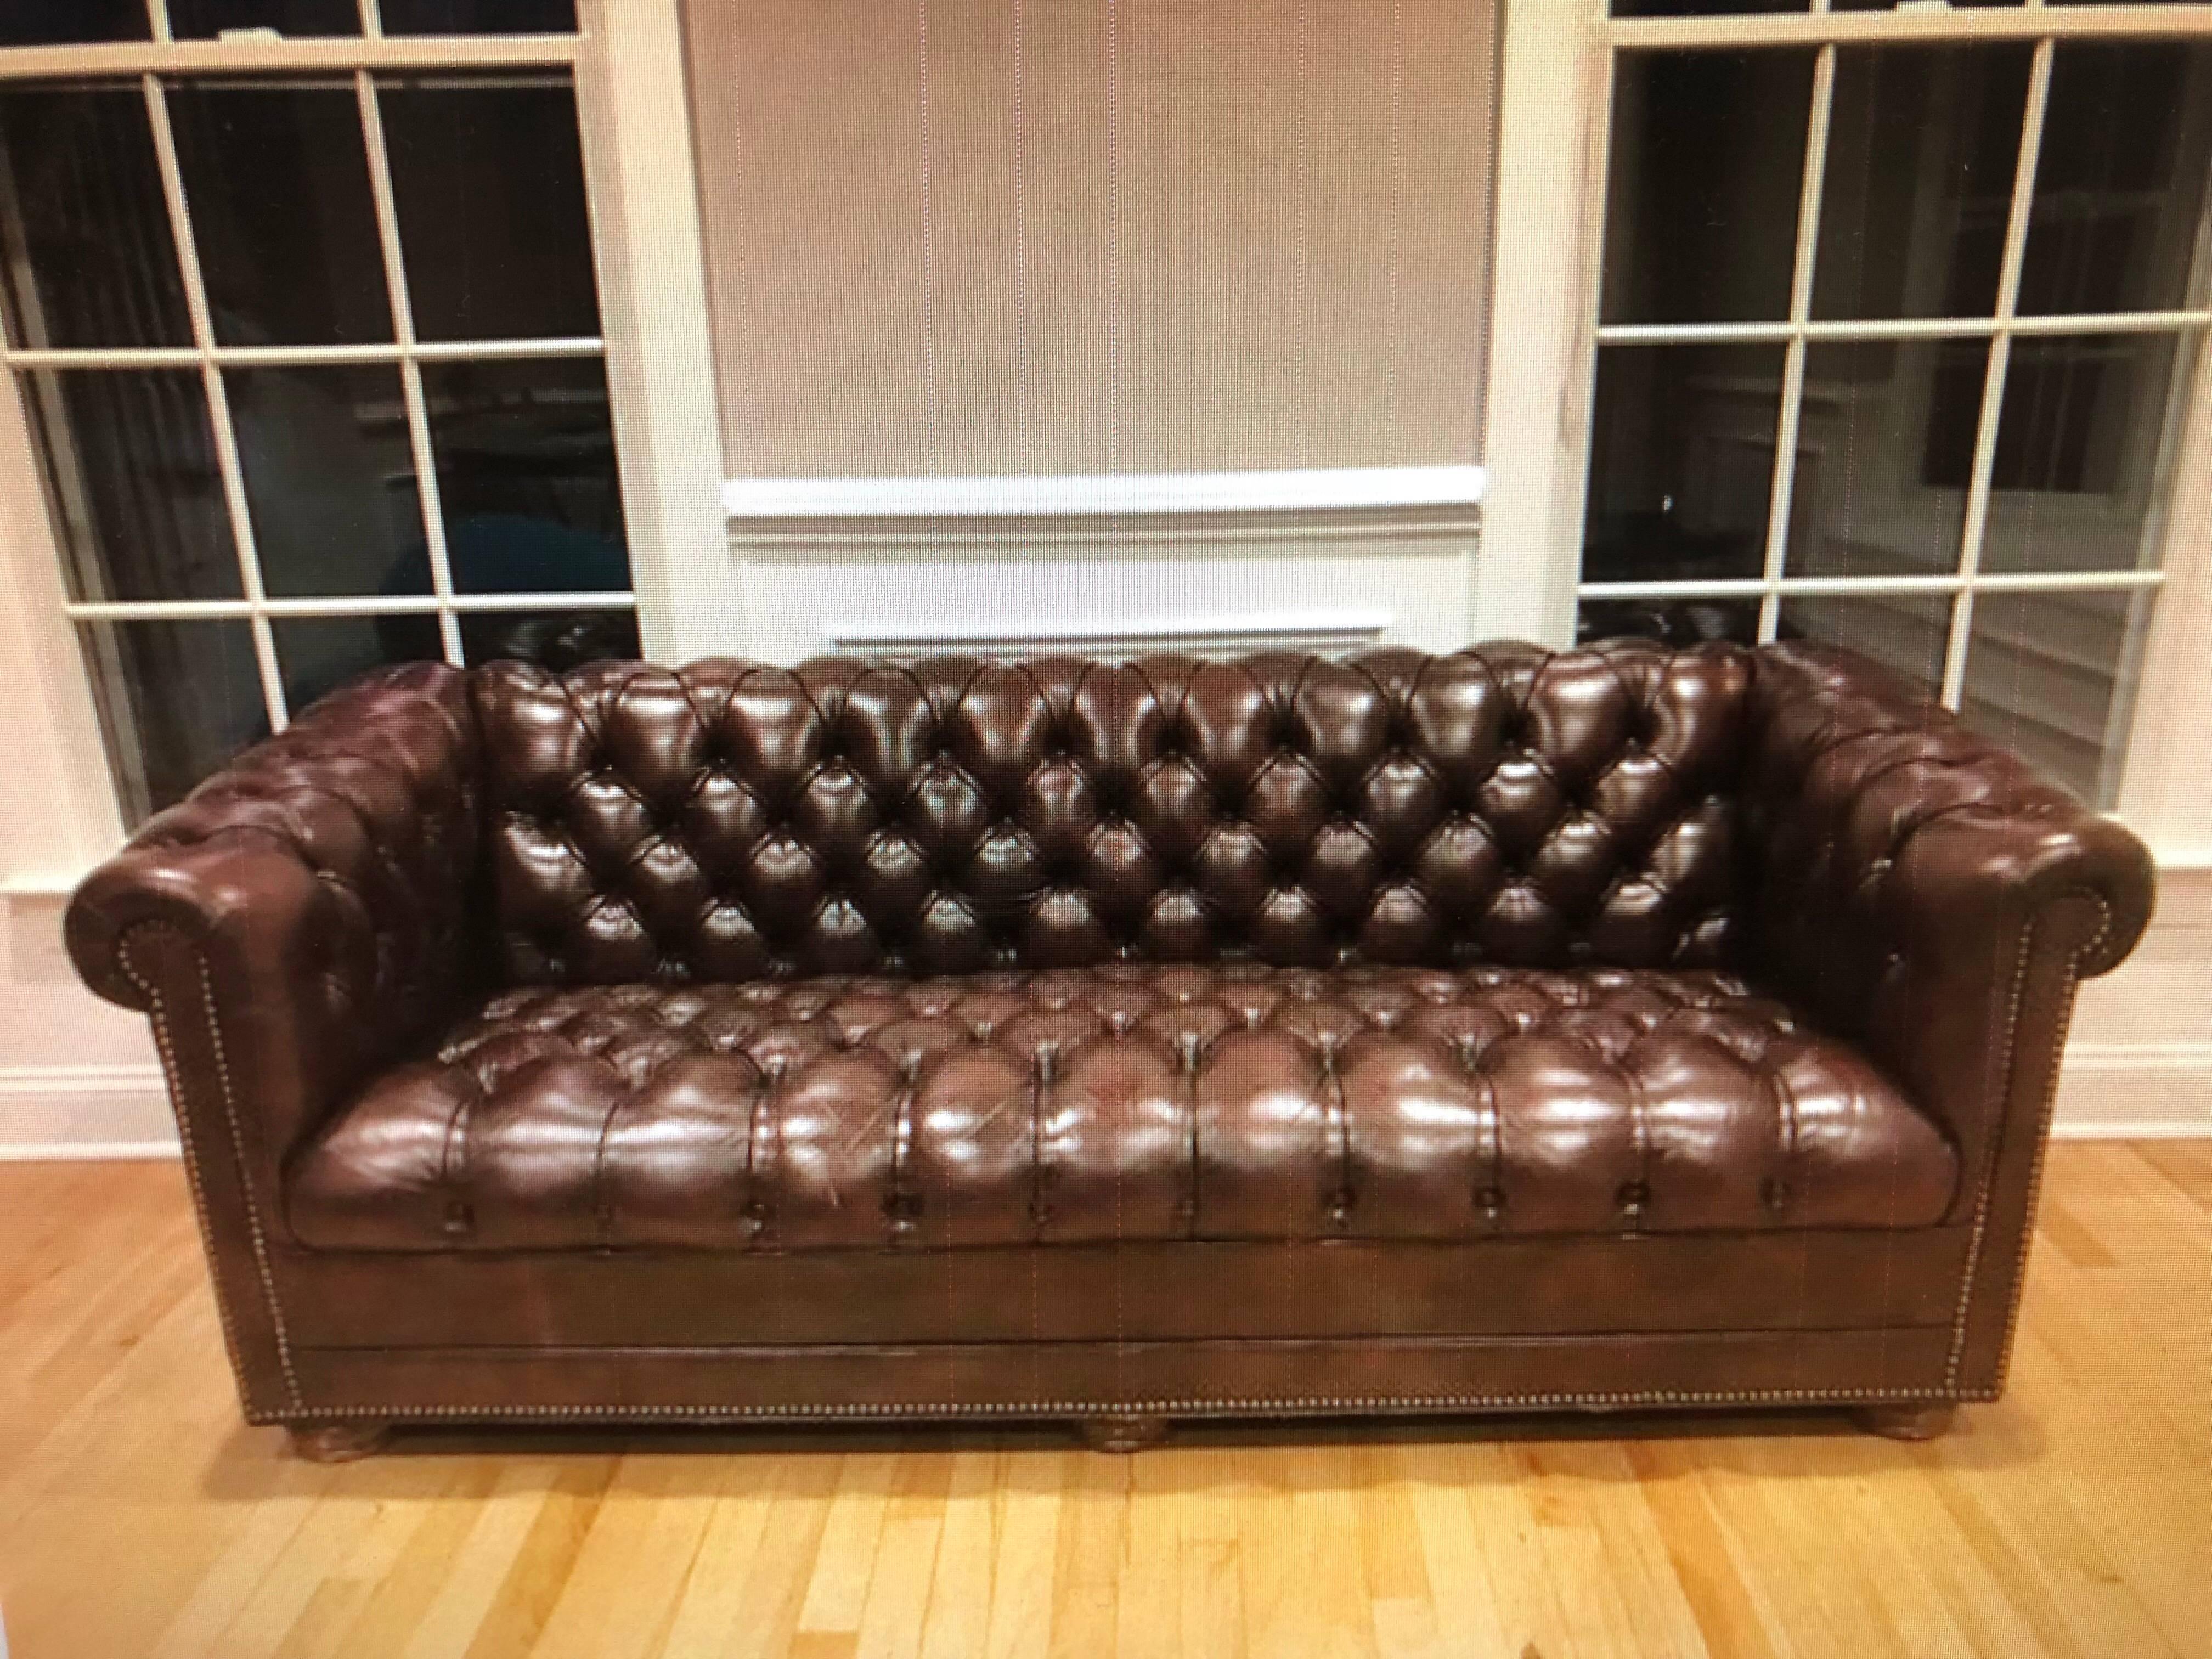 Brown tufted leather Chesterfield sofa. Classic elegant and stylish. This sofa would look great in a study, library , office or living room.